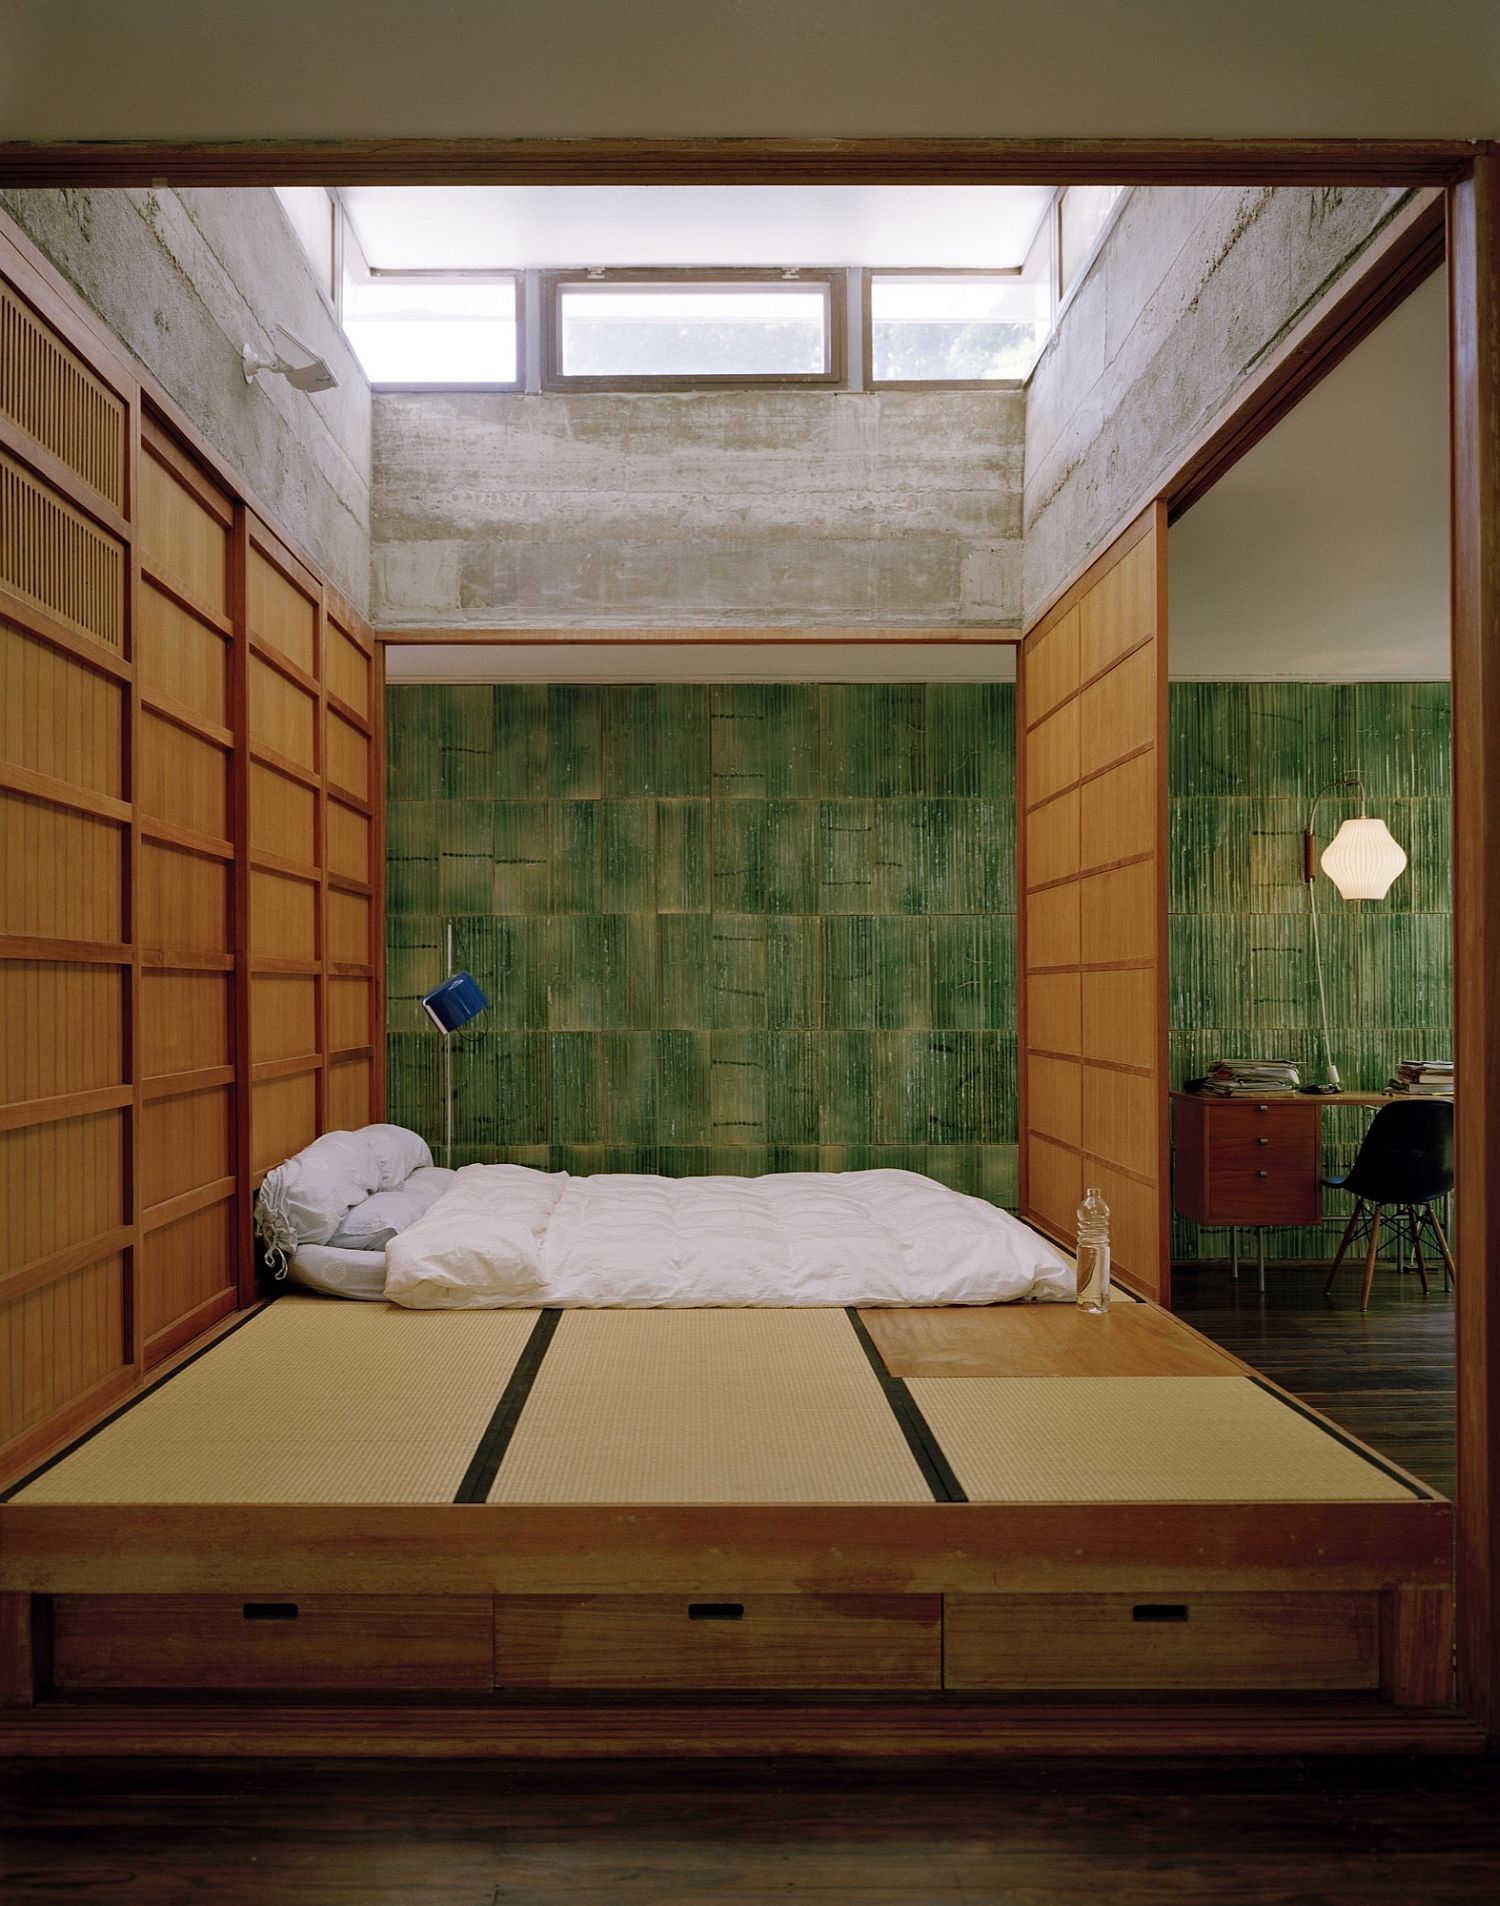 Minimal-Asian-style-bedroom-with-green-walls-and-a-woodsy-platform-bed